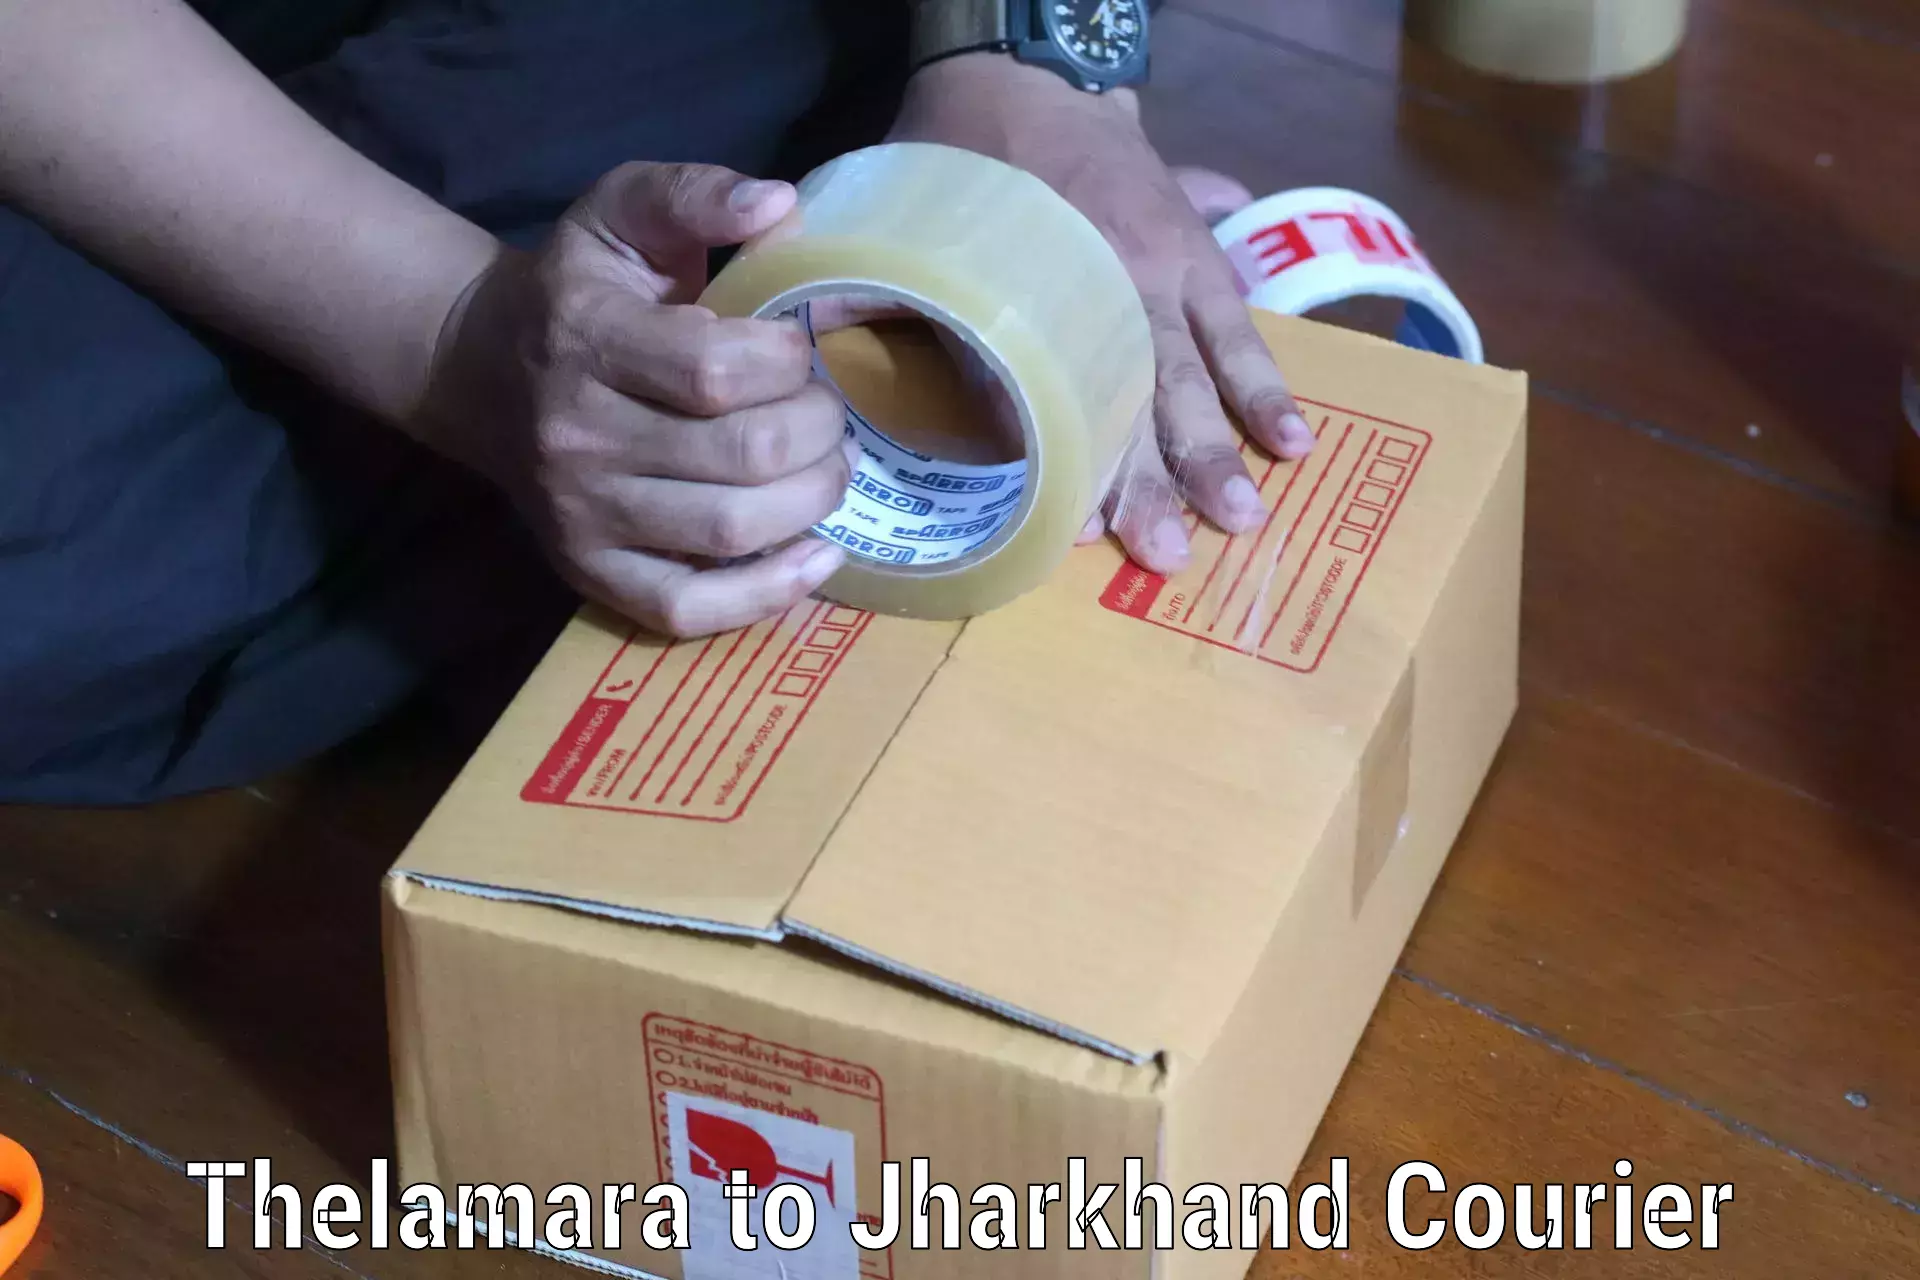 Courier service innovation Thelamara to Ramgarh